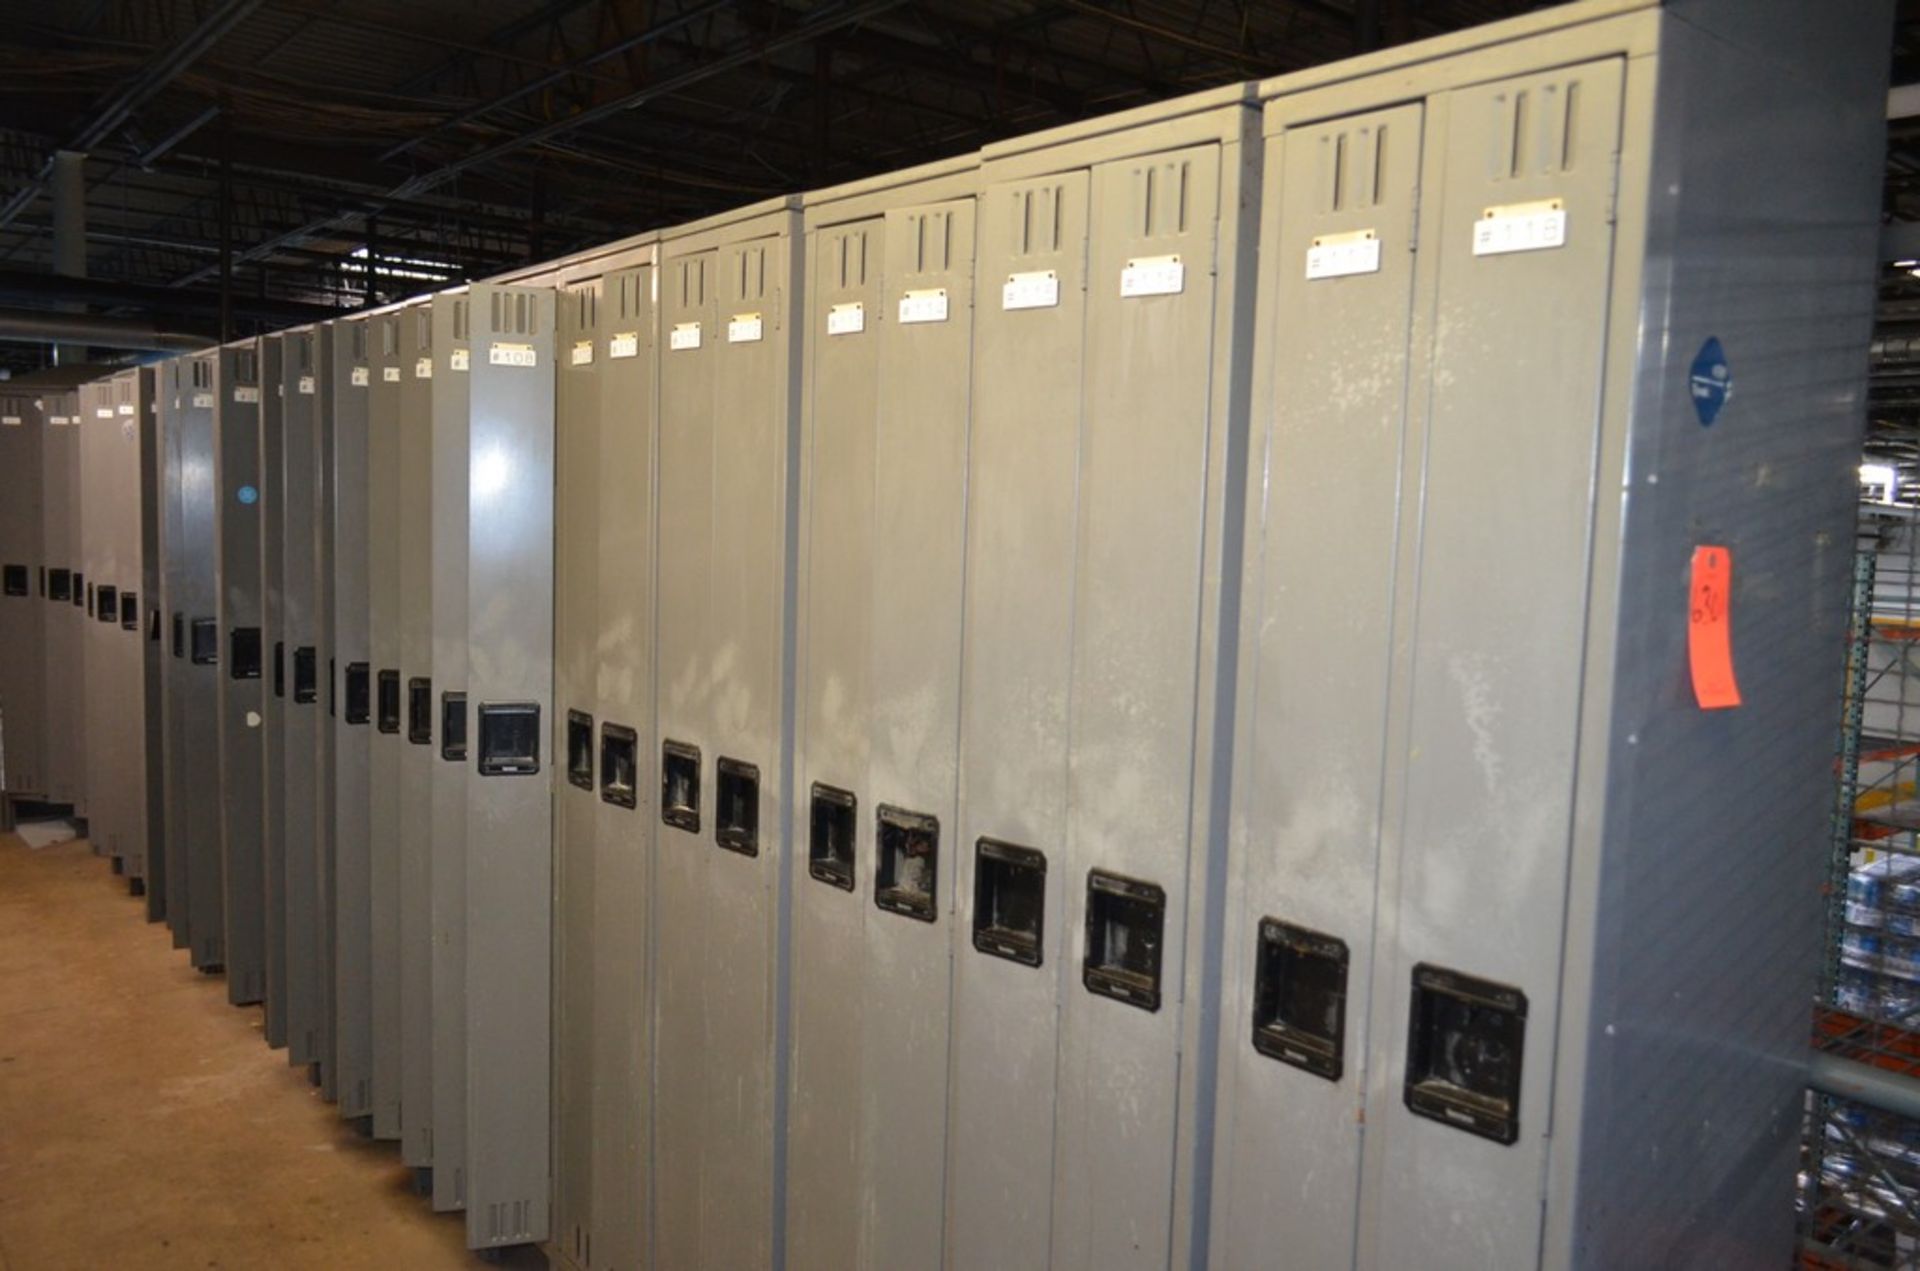 (Approx) 120 Lockers; Location in Plant: Outside Main Offices on Mezzanine